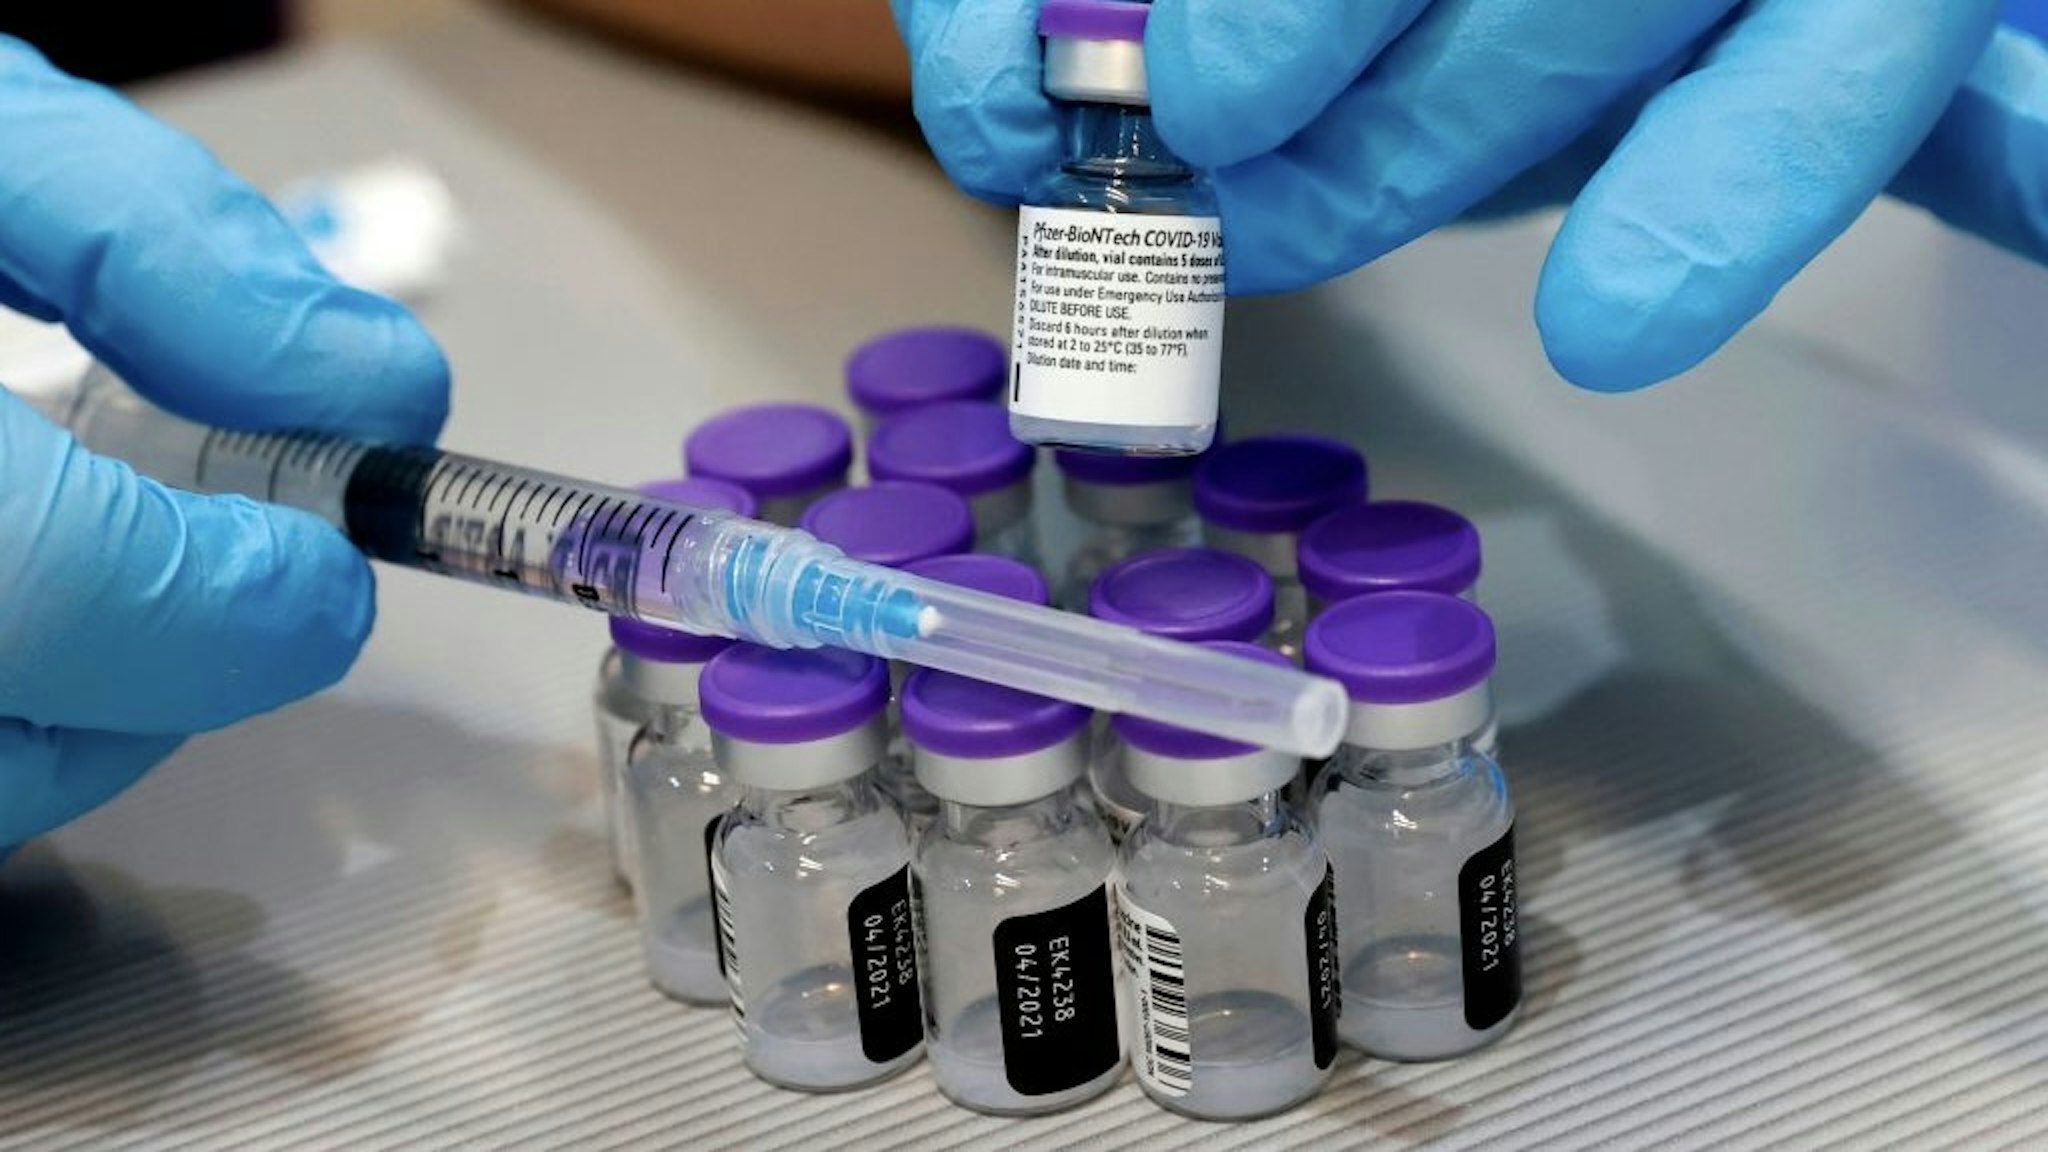 A syringe and vials of the Pfizer-BioNTech COVID-19 vaccine are pictured at the Sheba Medical Center, Israel's largest hospital, in Ramat Gan near the coastal city of Tel Aviv, on January 14, 2021. - Israel's initial vaccination rollout appears to be unfolding successfully, with some two million citizens having received the first of two required injections of the Pfizer-BioNTech jab, a pace widely described as the world's fastest per capita. (Photo by JACK GUEZ / AFP) (Photo by JACK GUEZ/AFP via Getty Images)